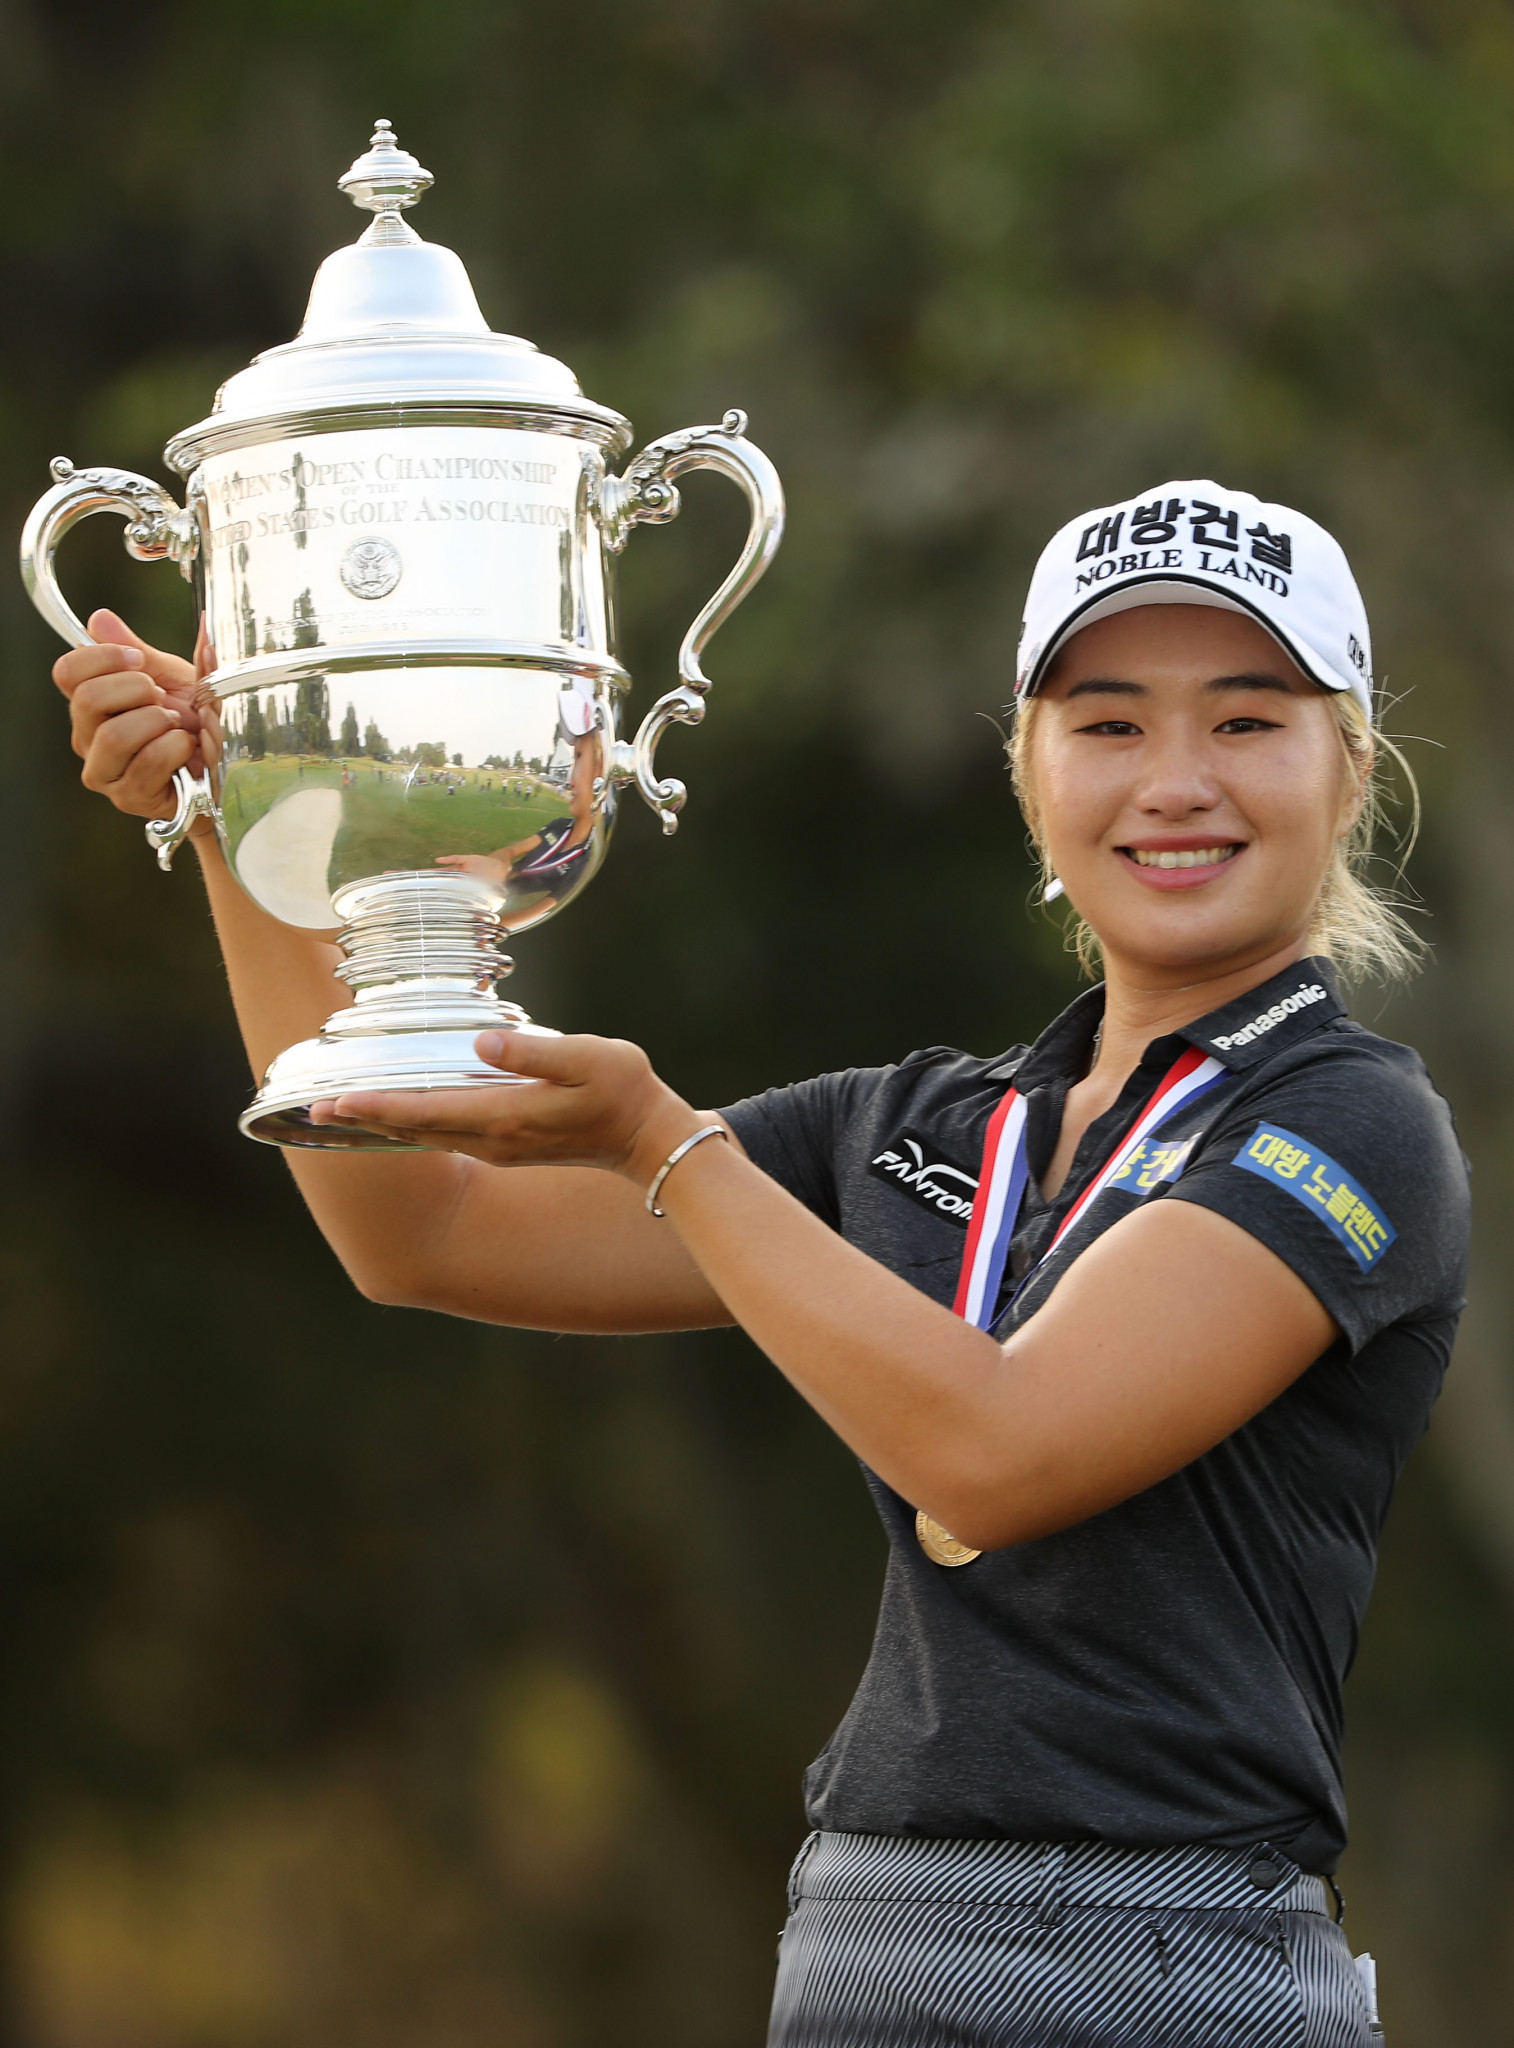 Jeongeun Lee6 emerged as number one at the US Women's Open Golf Champi...